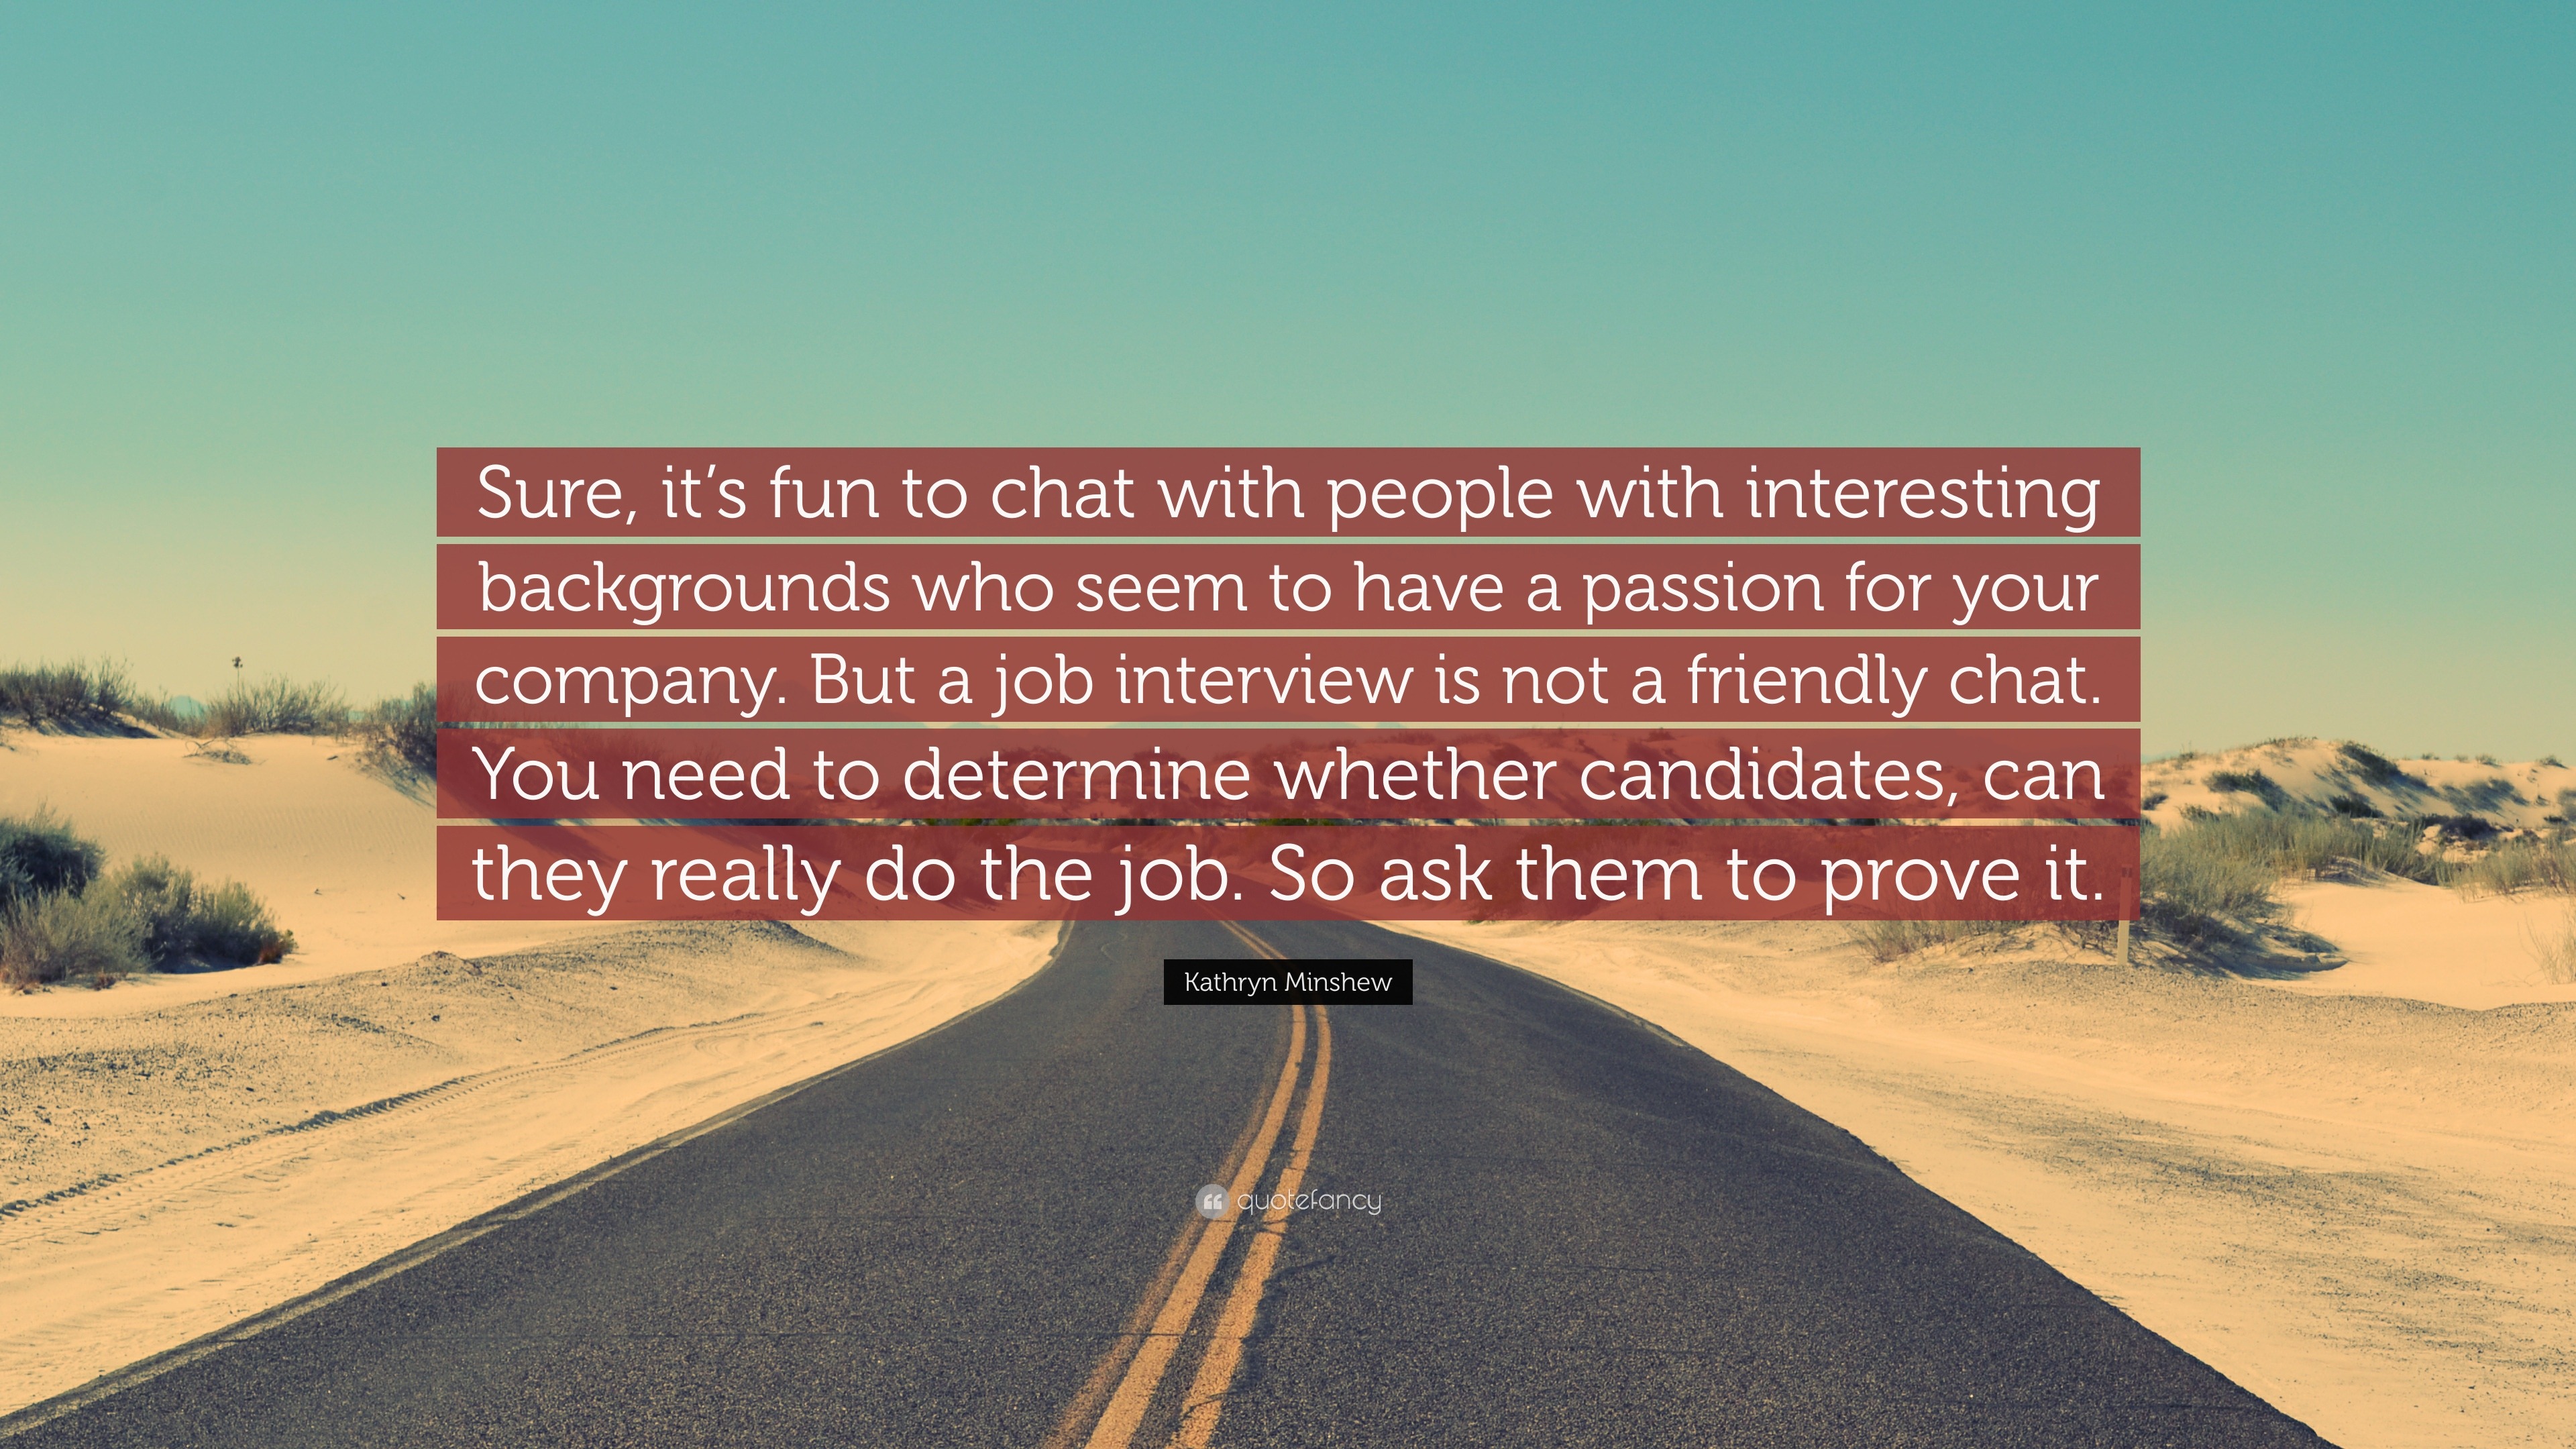 Kathryn Minshew Quote: “Sure, it’s fun to chat with people with